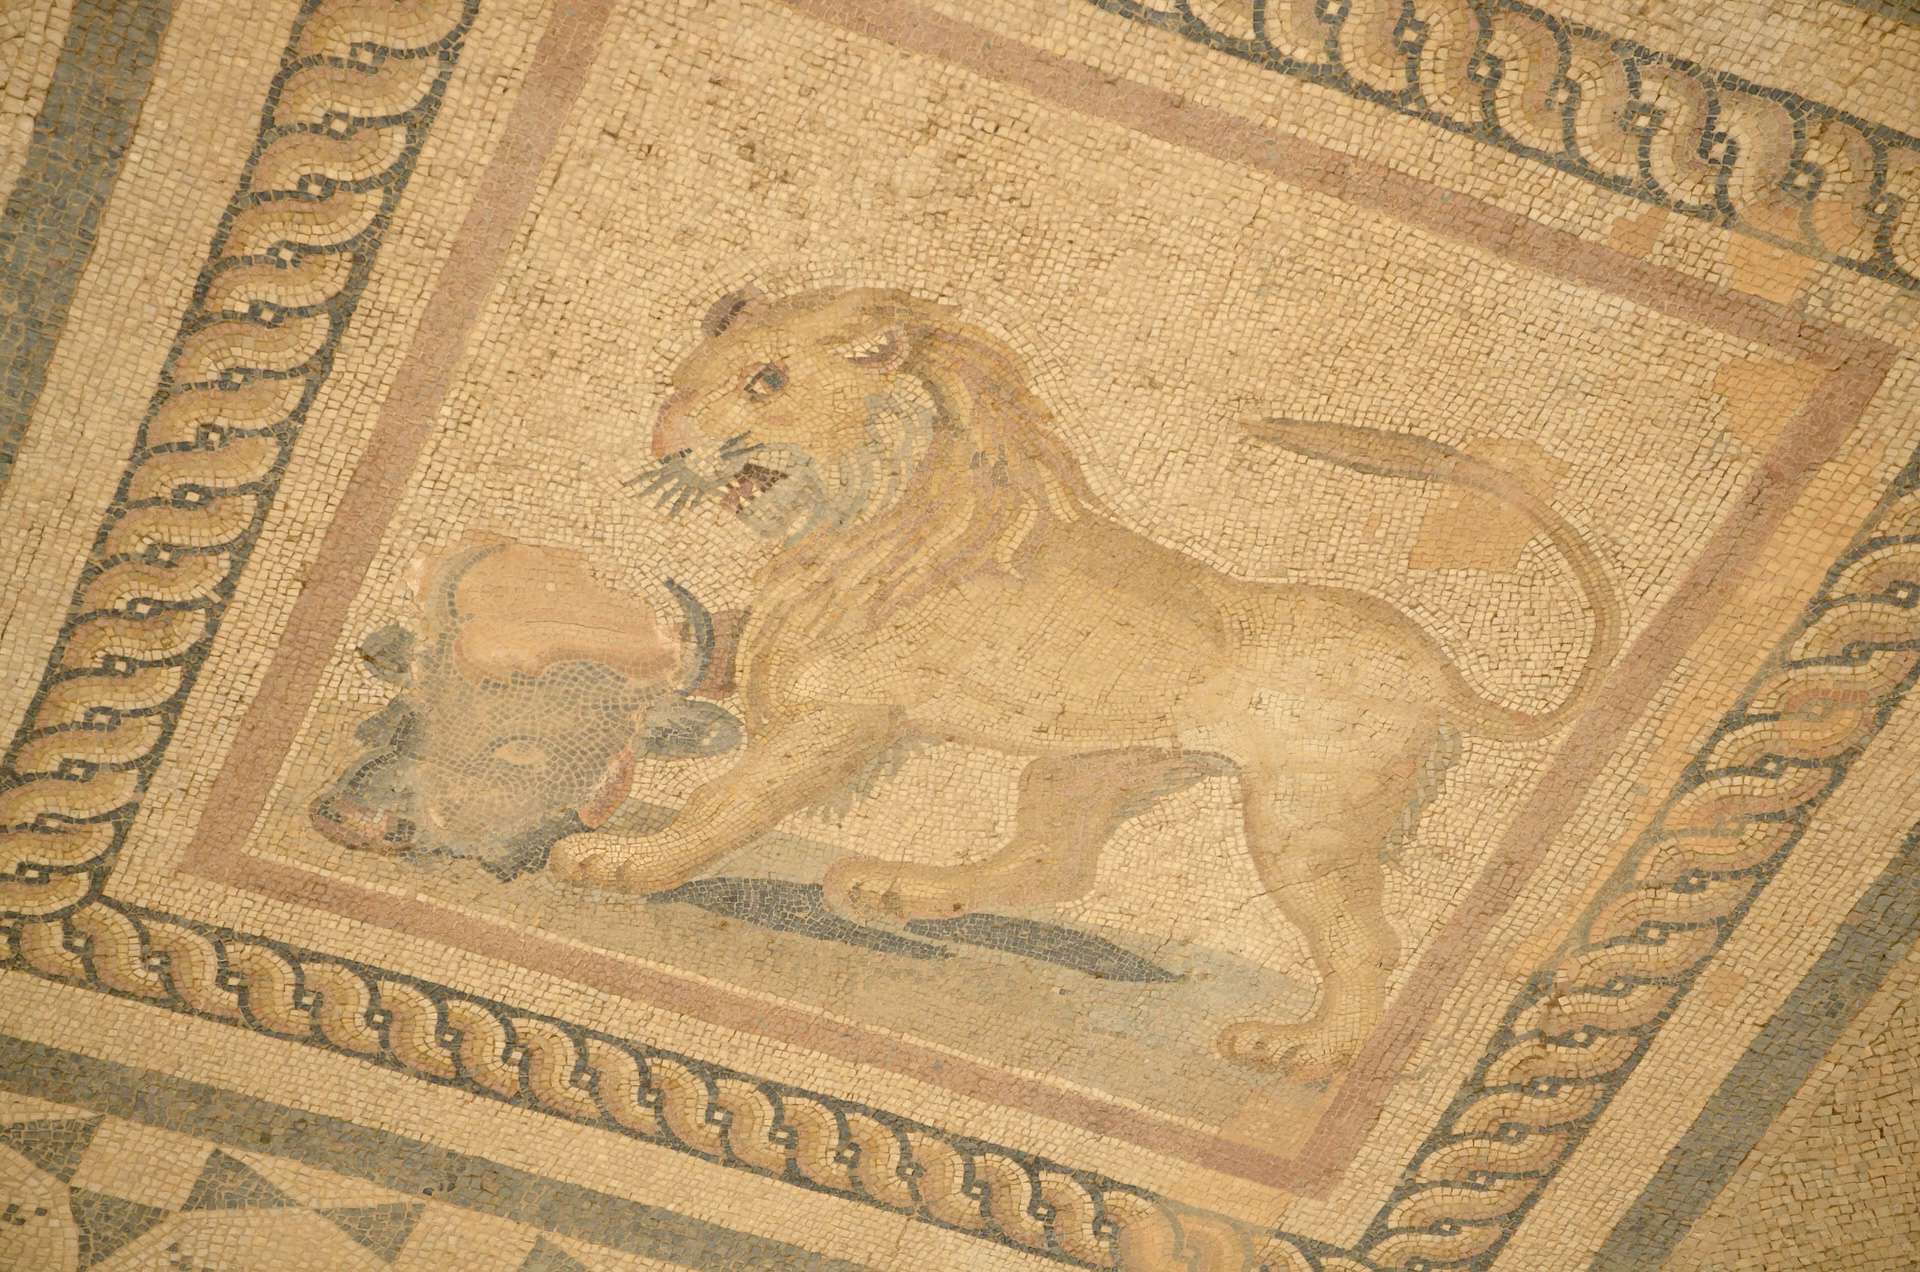 Mosaic of a lion in Room 17 in Dwelling Unit 3